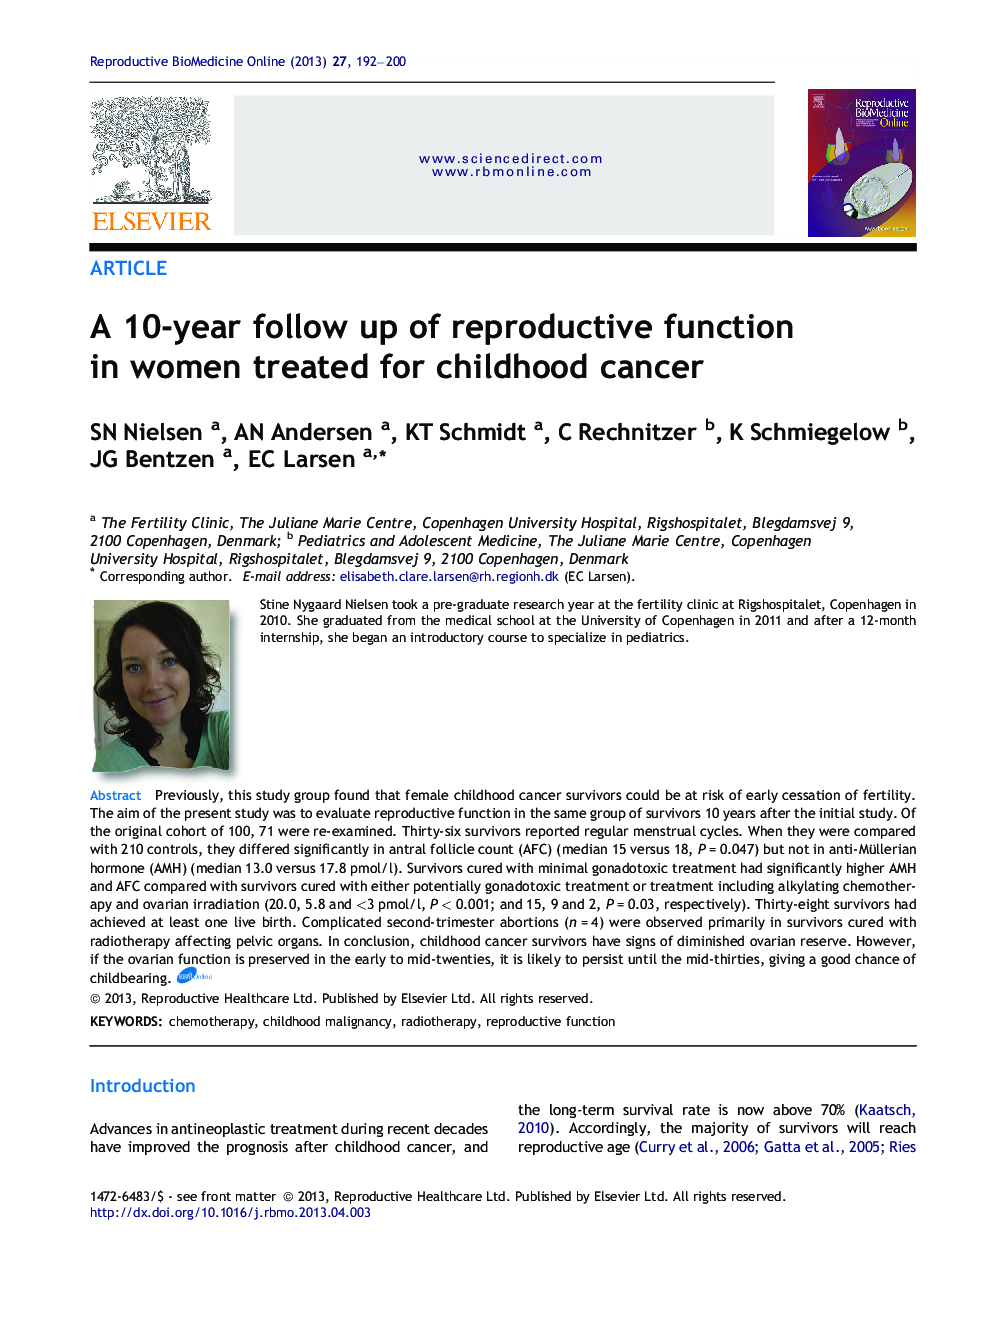 A 10-year follow up of reproductive function in women treated for childhood cancer 